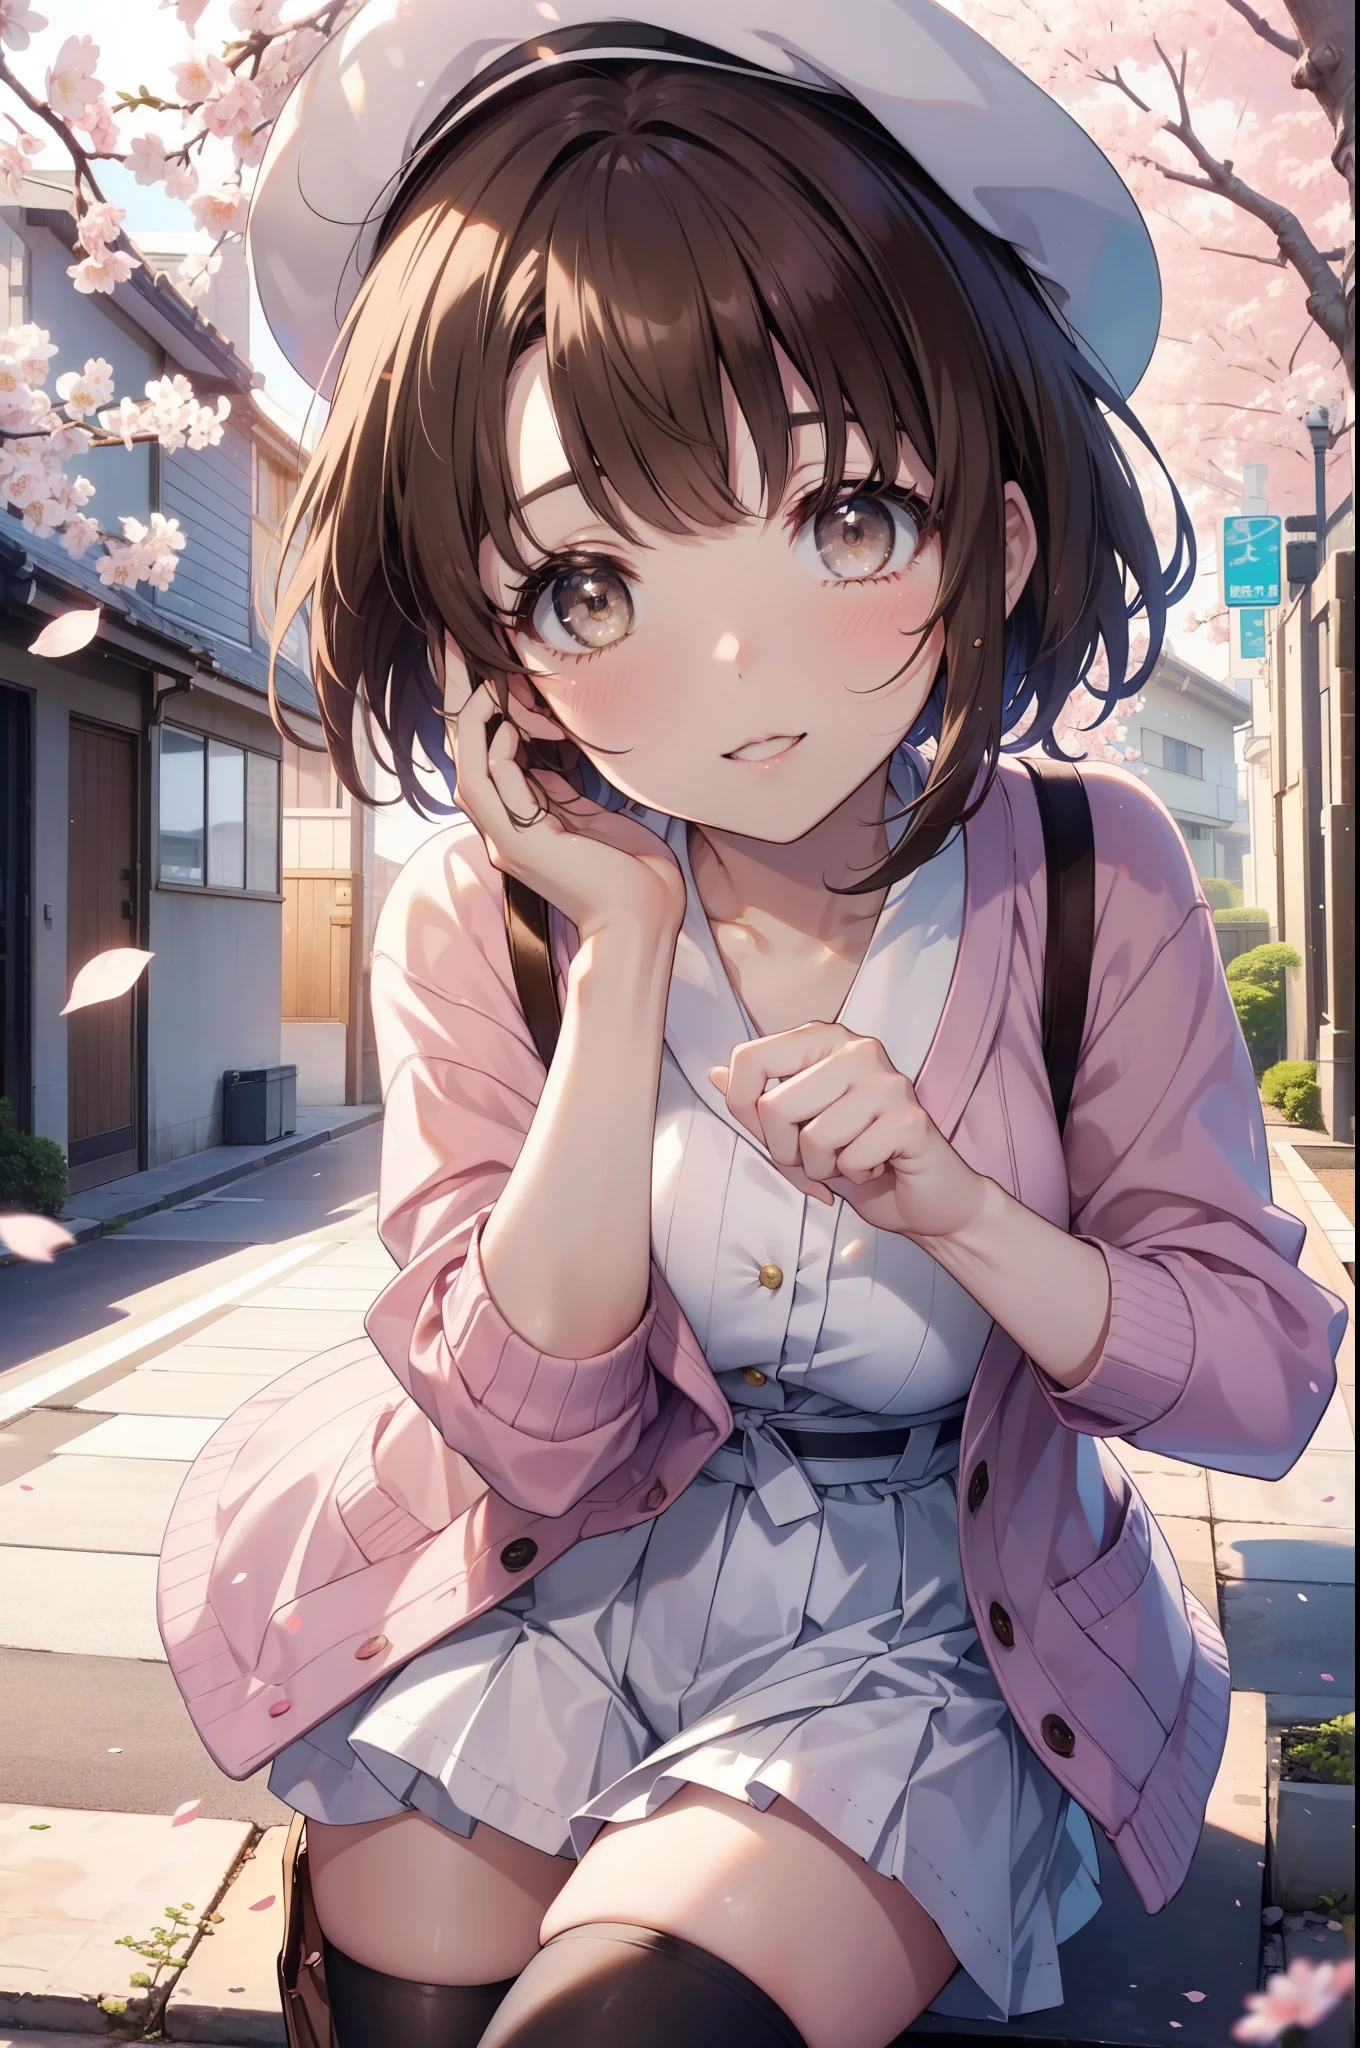 katoumegumi, megumi katou, brown hair, short hair, (brown eyes:1.5),smile,blush,open your mouth,happy atmosphere white beret hat, oversized sweater,short denim pants,white pantyhose,short boots,Asahi,sun,sunが登っている,SakuraFubuki,cherry blossoms are blooming,Cherry blossoms are scattered,
break looking at viewer,
break outdoors, residential street,
break (masterpiece:1.2), highest quality, High resolution, unity 8k wallpaper, (figure:0.8), (detailed and beautiful eyes:1.6), highly detailed face, perfect lighting, Very detailed CG, (perfect hands, perfect anatomy),